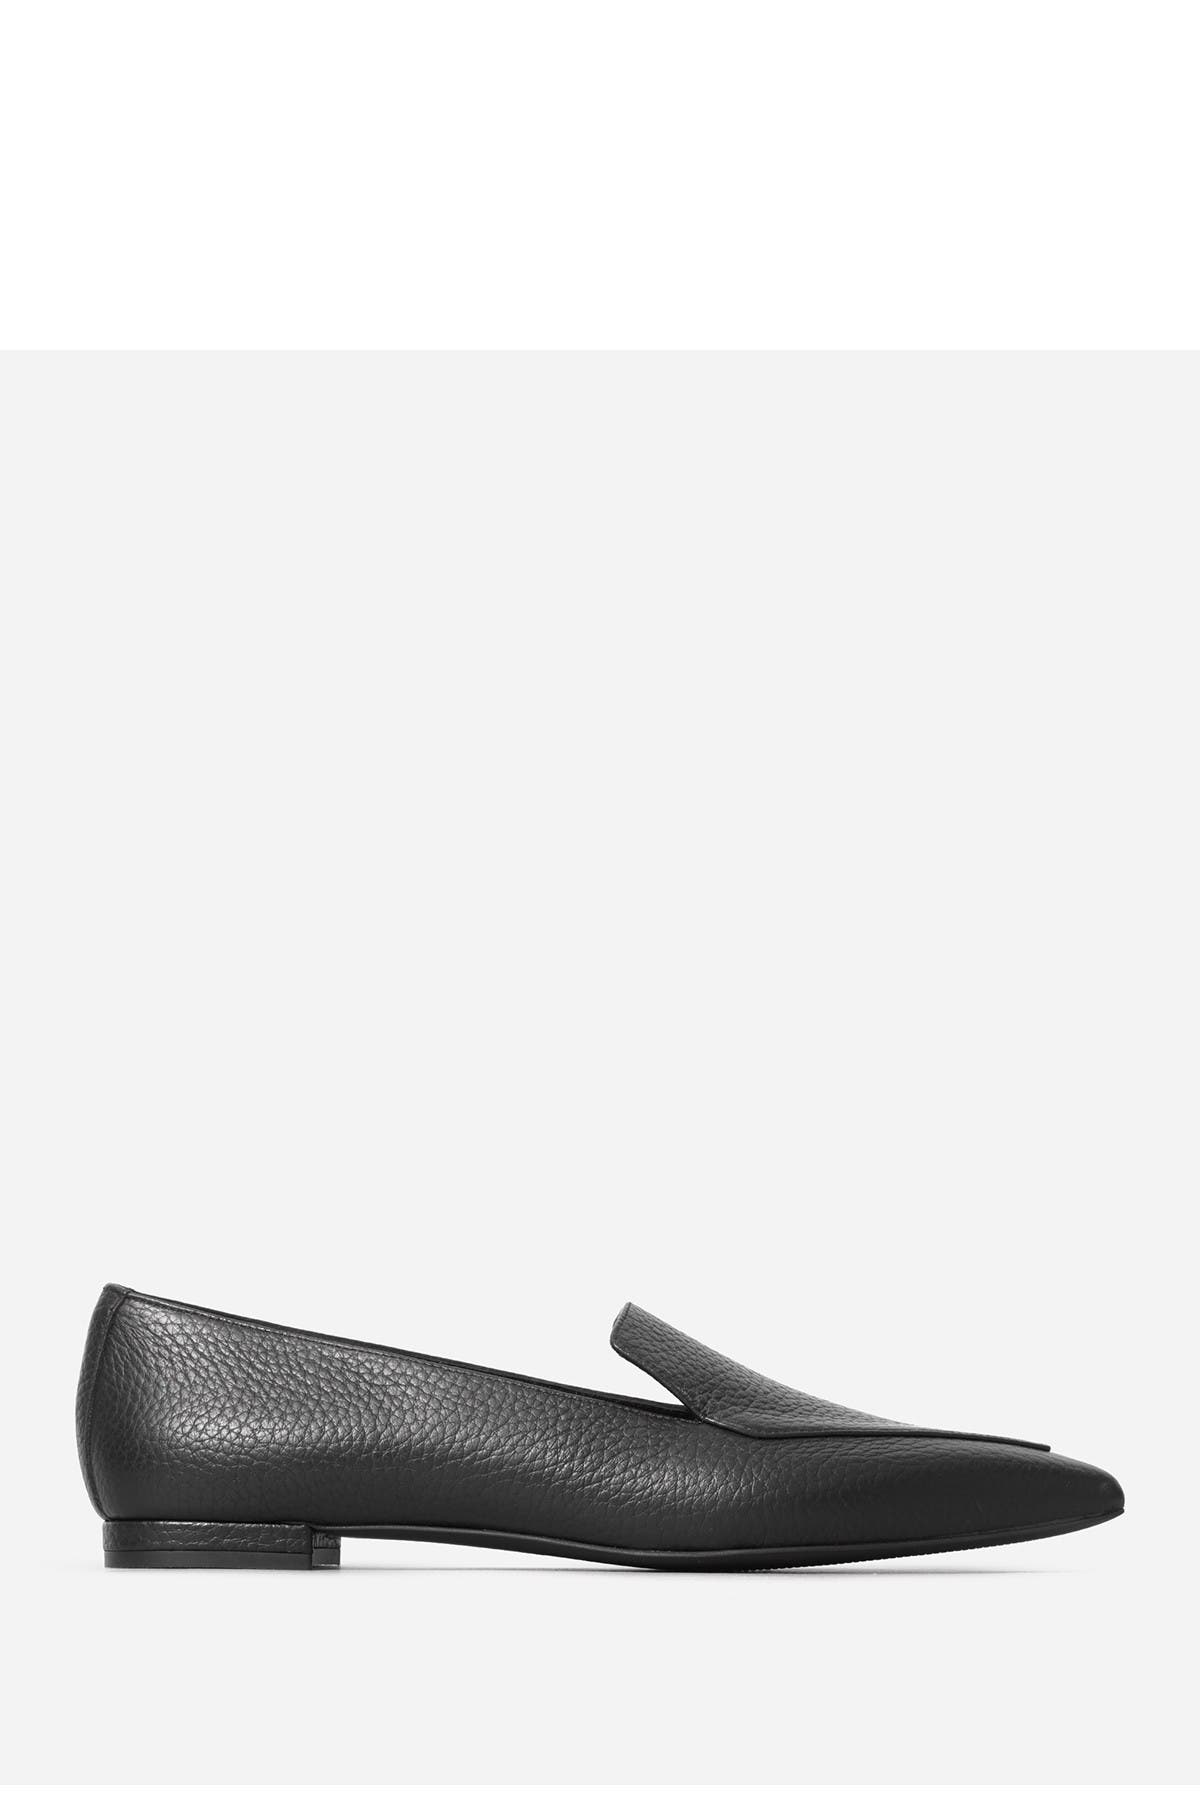 boss lady shoes nordstrom